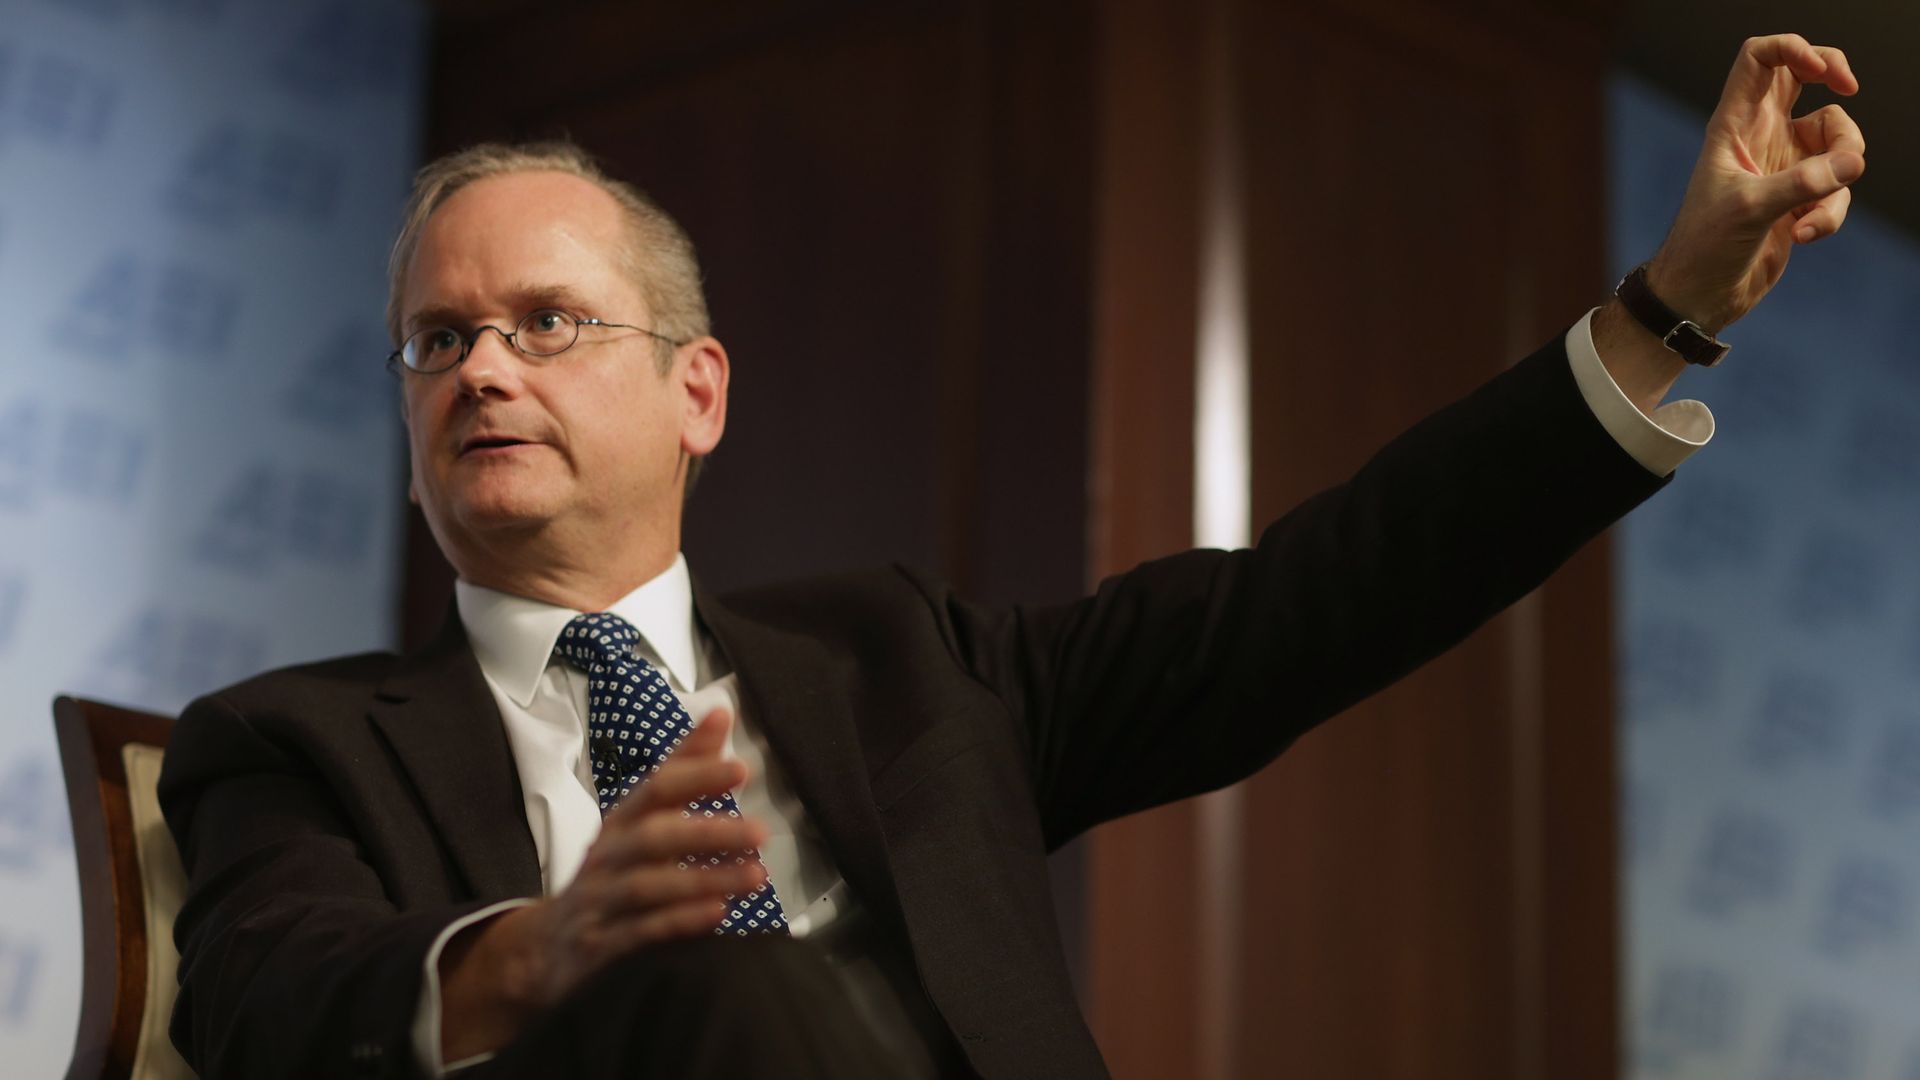 Harvard Law School professor and former 2016 Democratic presidential candidate Lawrence Lessig discusses campaign finance reform at the American Enterprise Institute November 13, 2015 in Washington, DC.